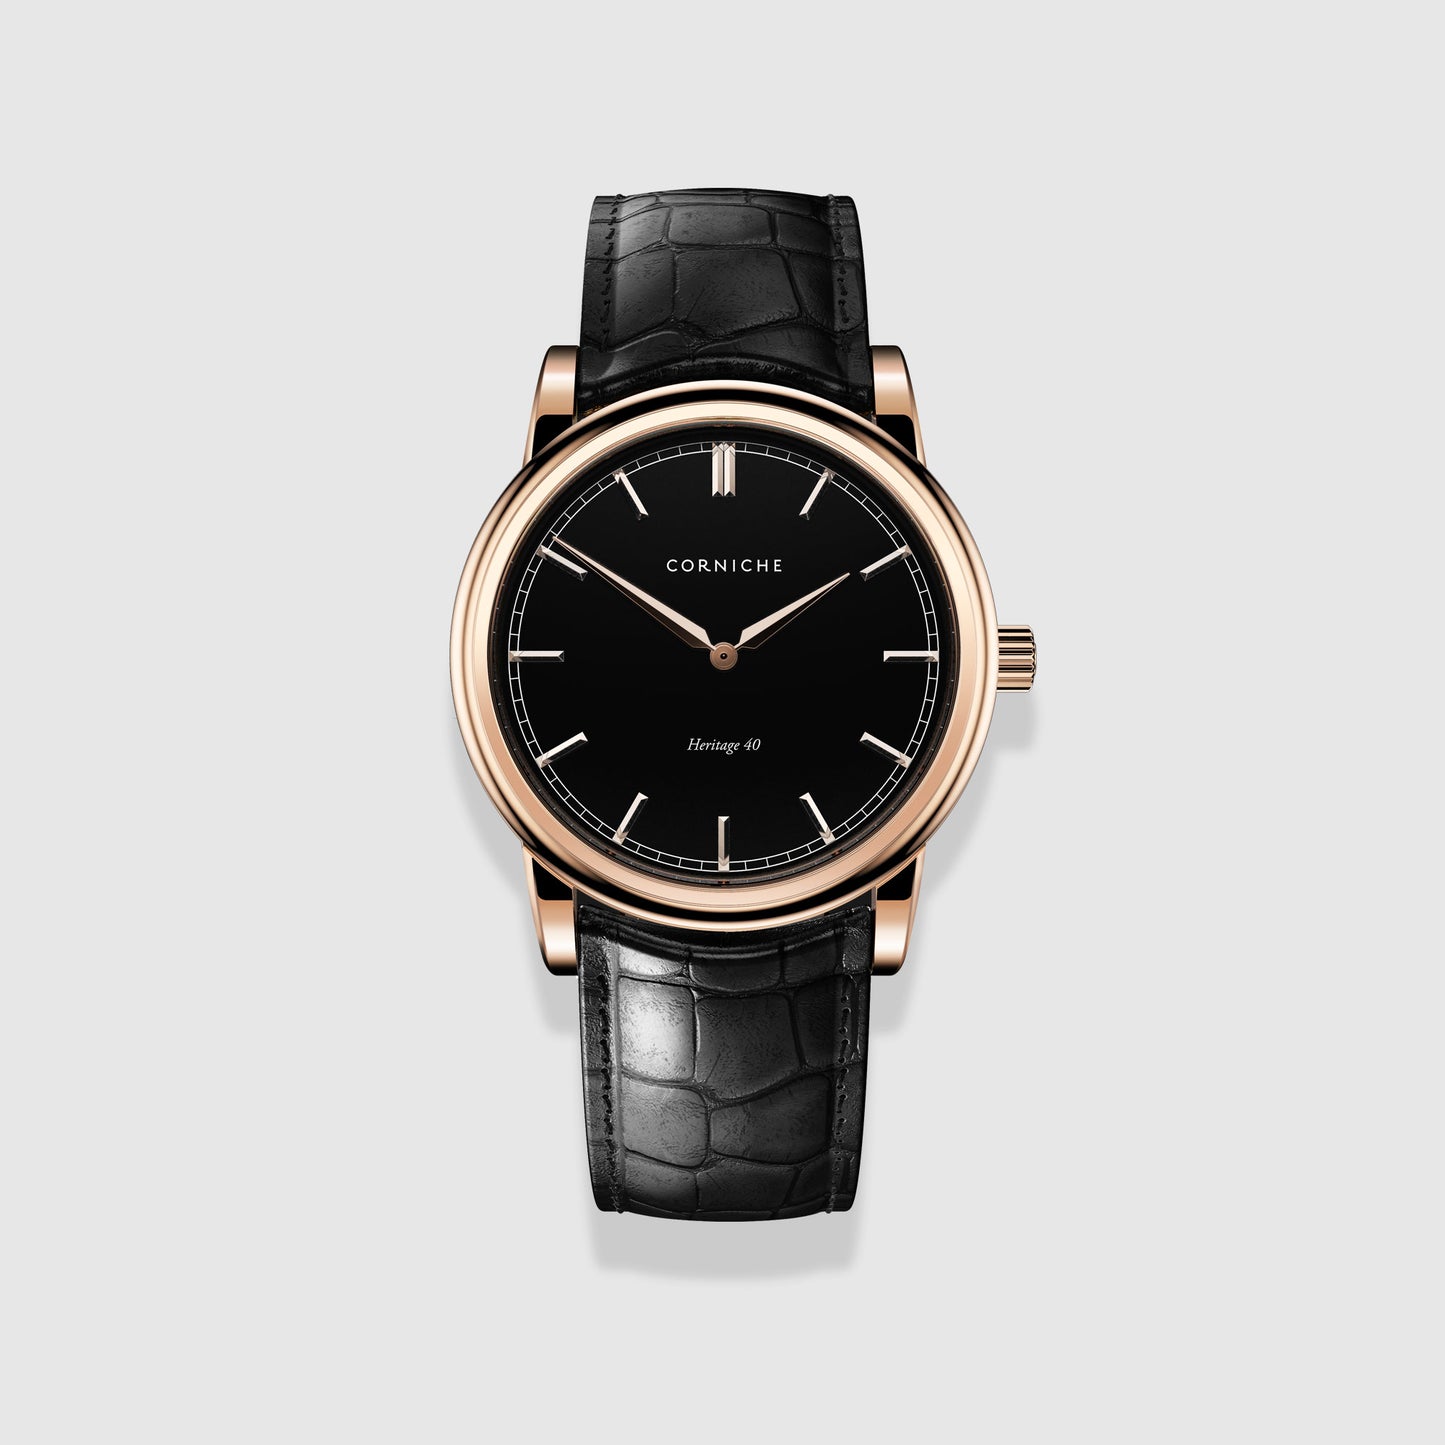 Corniche Heritage 40 Rose Gold Men's Watch with Black Dial